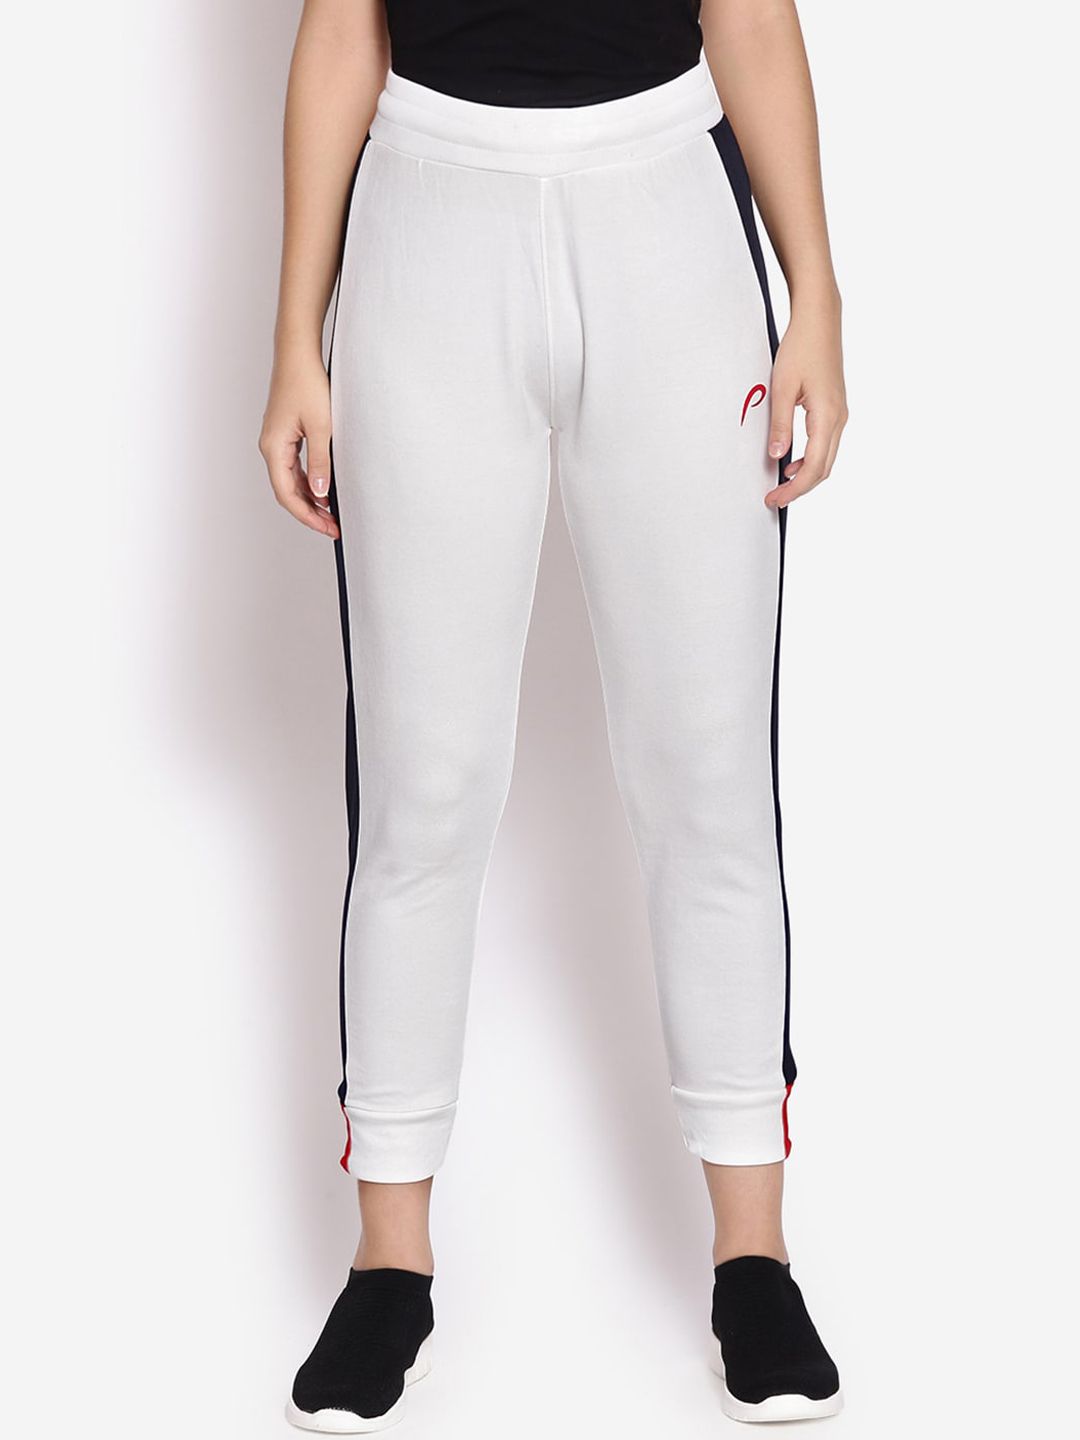 Proline Women Grey & Black Solid Joggers Price in India